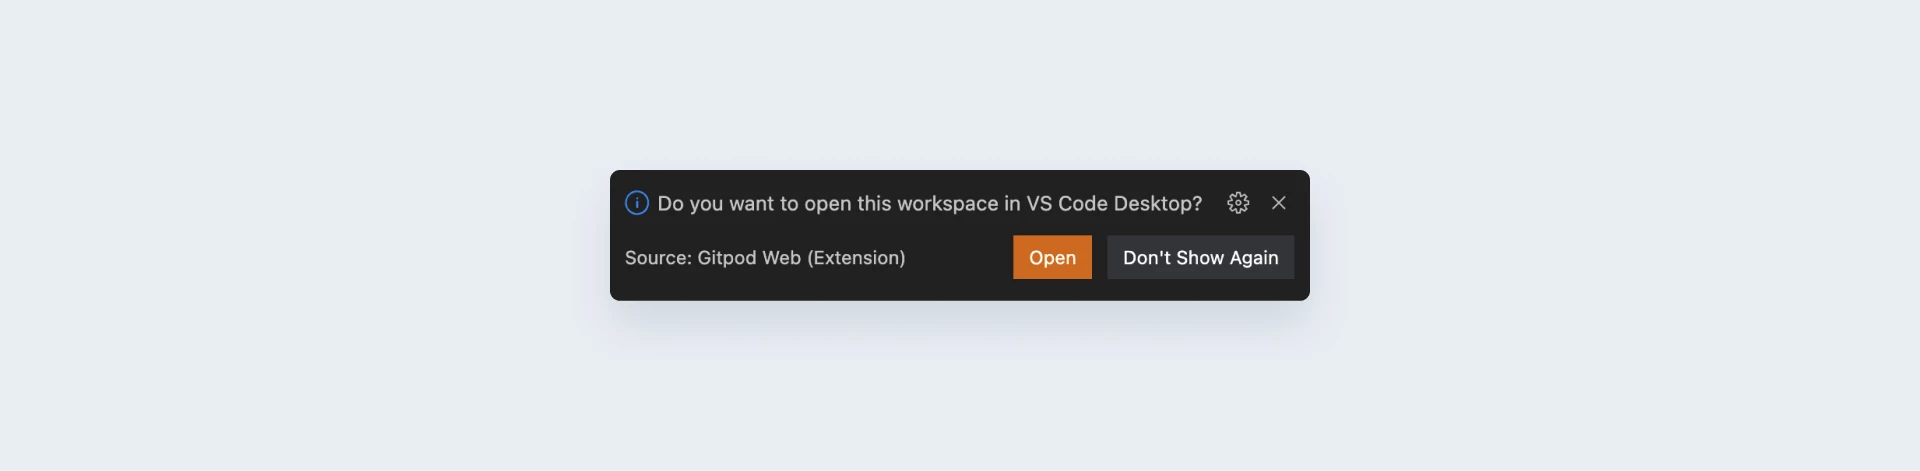 Do you want to run the workspace in VS Code Desktop?